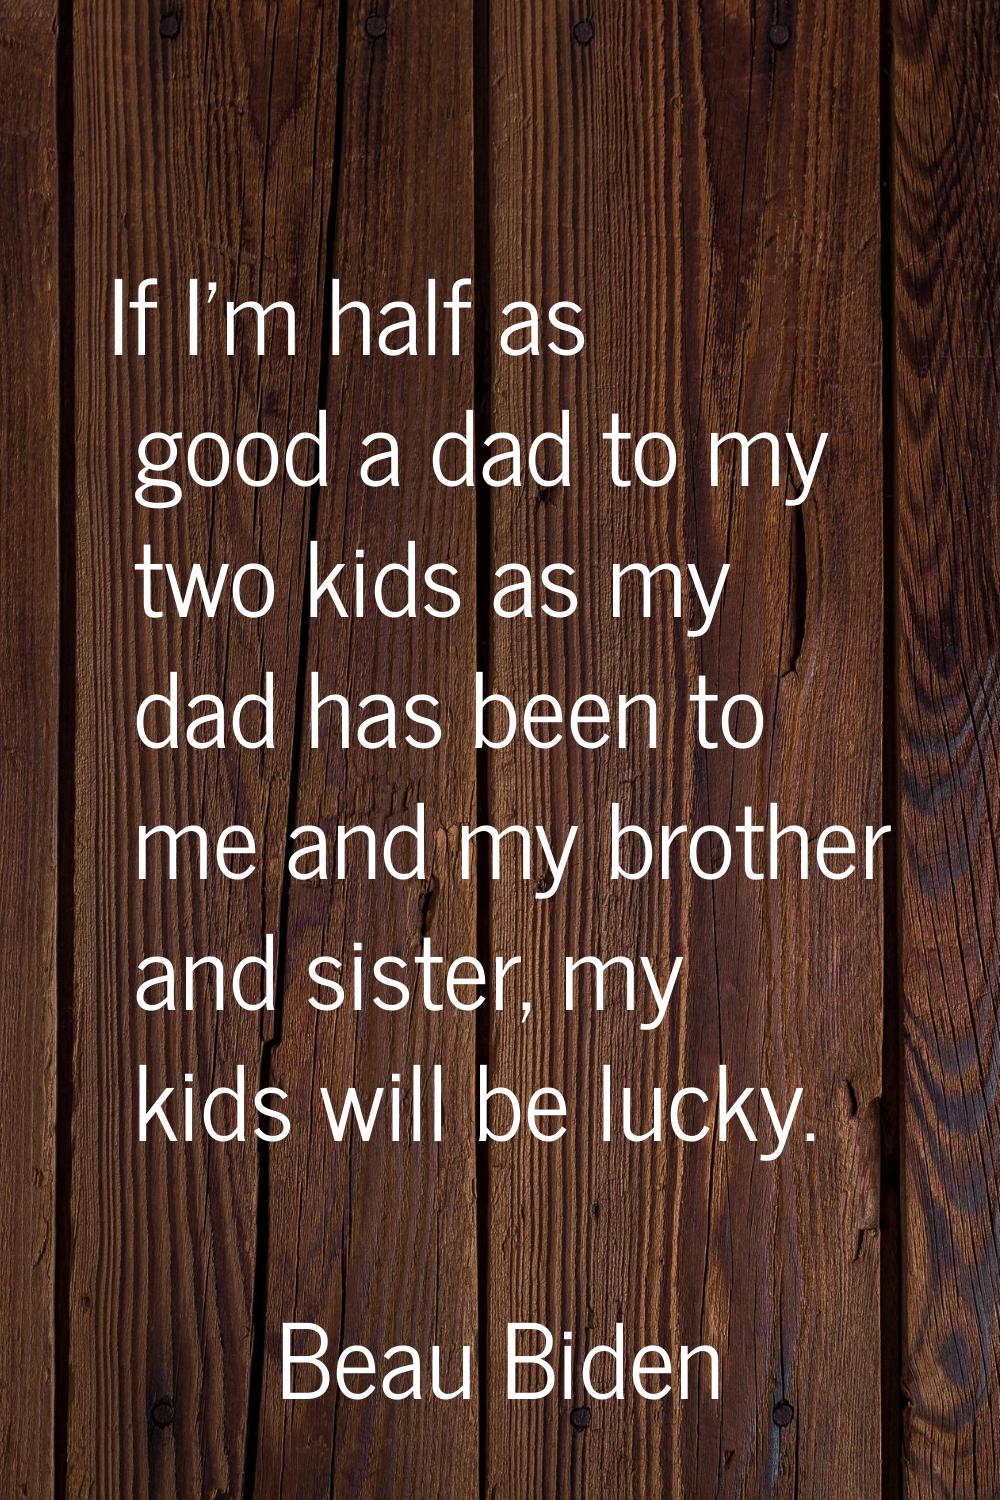 If I'm half as good a dad to my two kids as my dad has been to me and my brother and sister, my kid